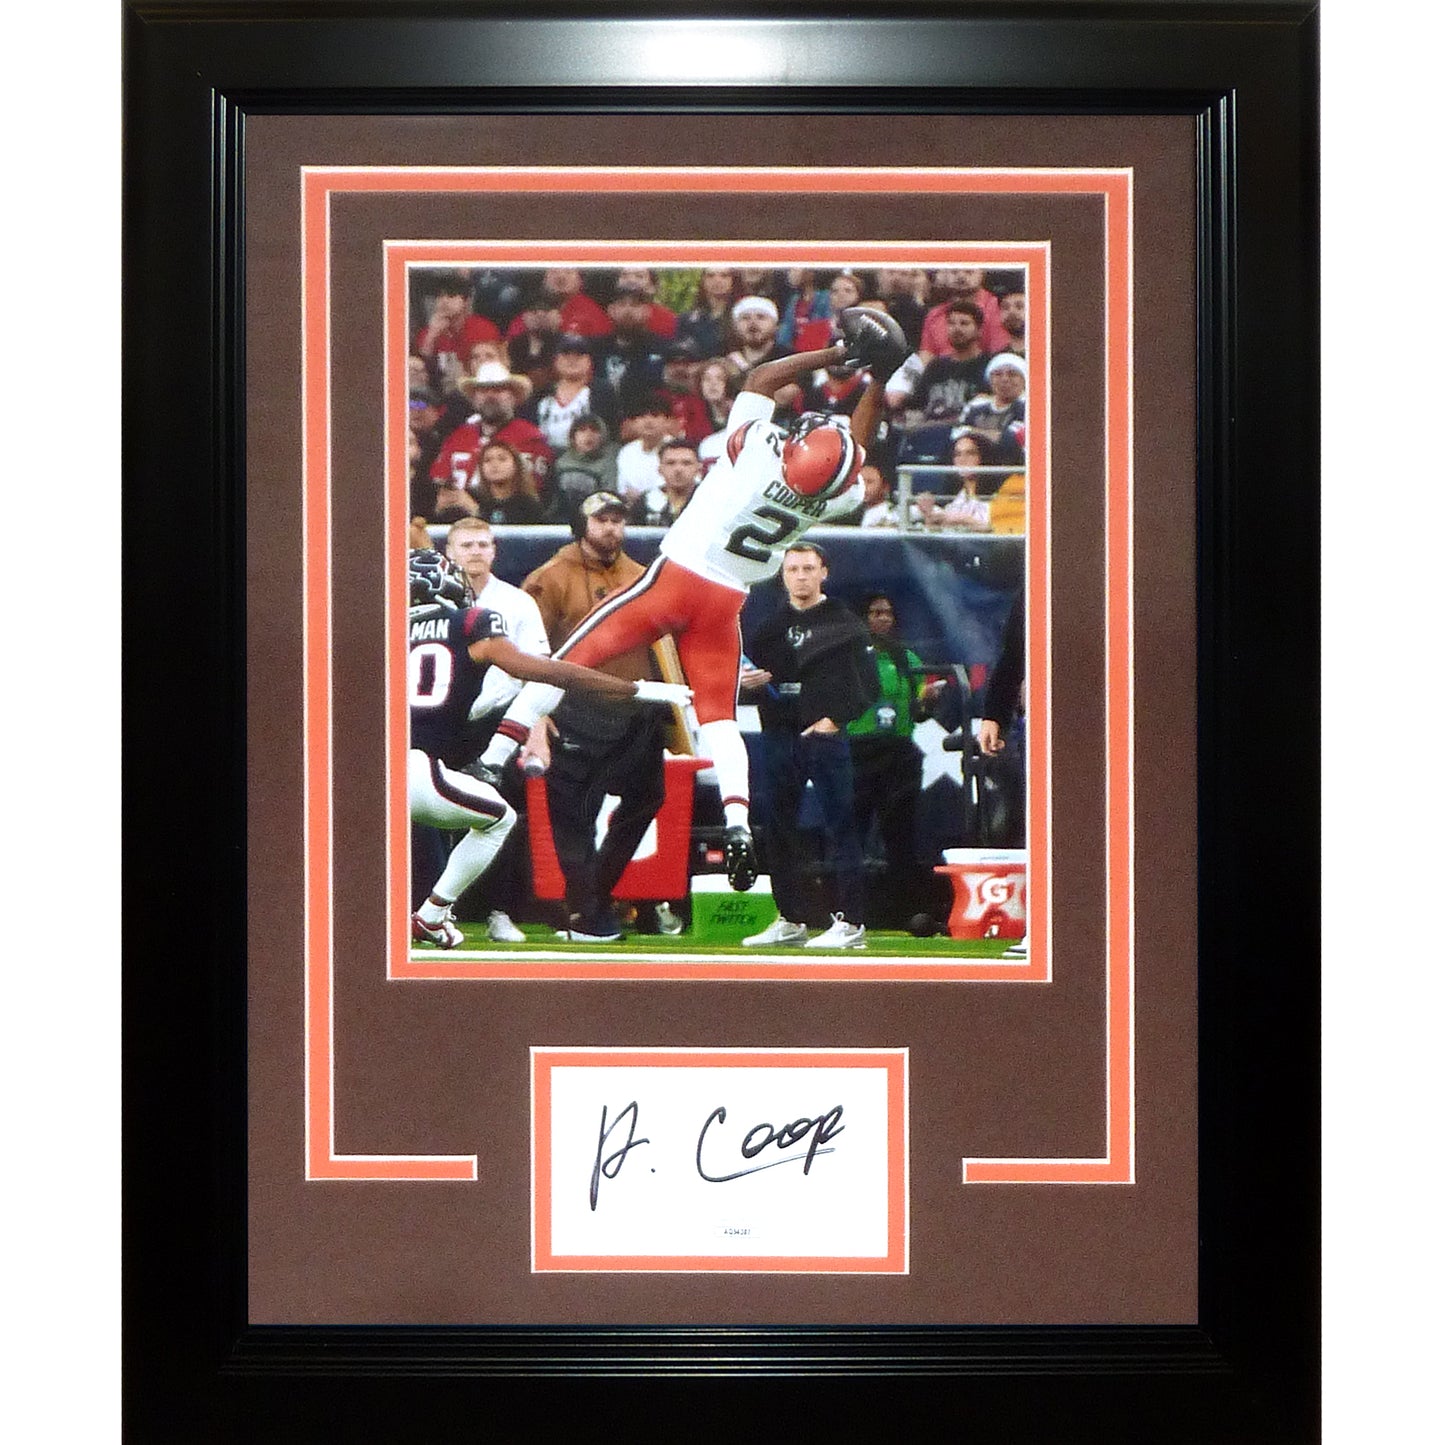 Amari Cooper Autographed Cleveland Browns (265 Receiving Yards Game) "Signature Series" Frame